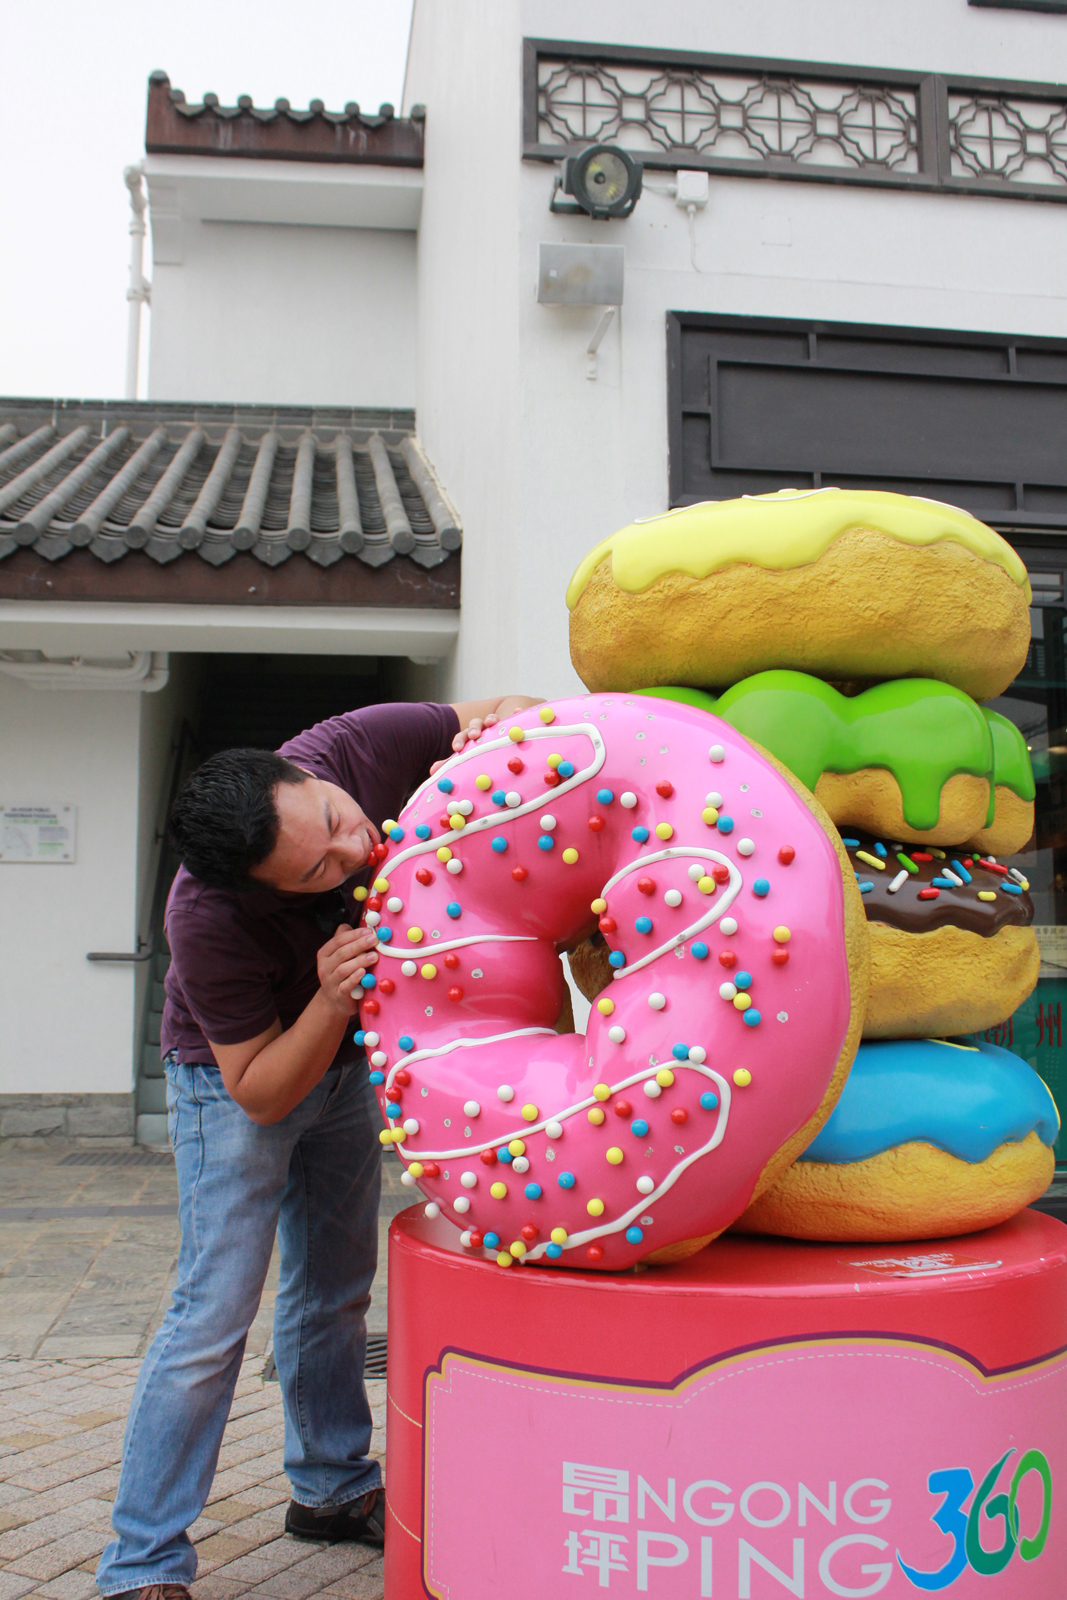 And finally, you have me being goofy and pretending to eat the large doughnut sculpture we found in the shopping district.